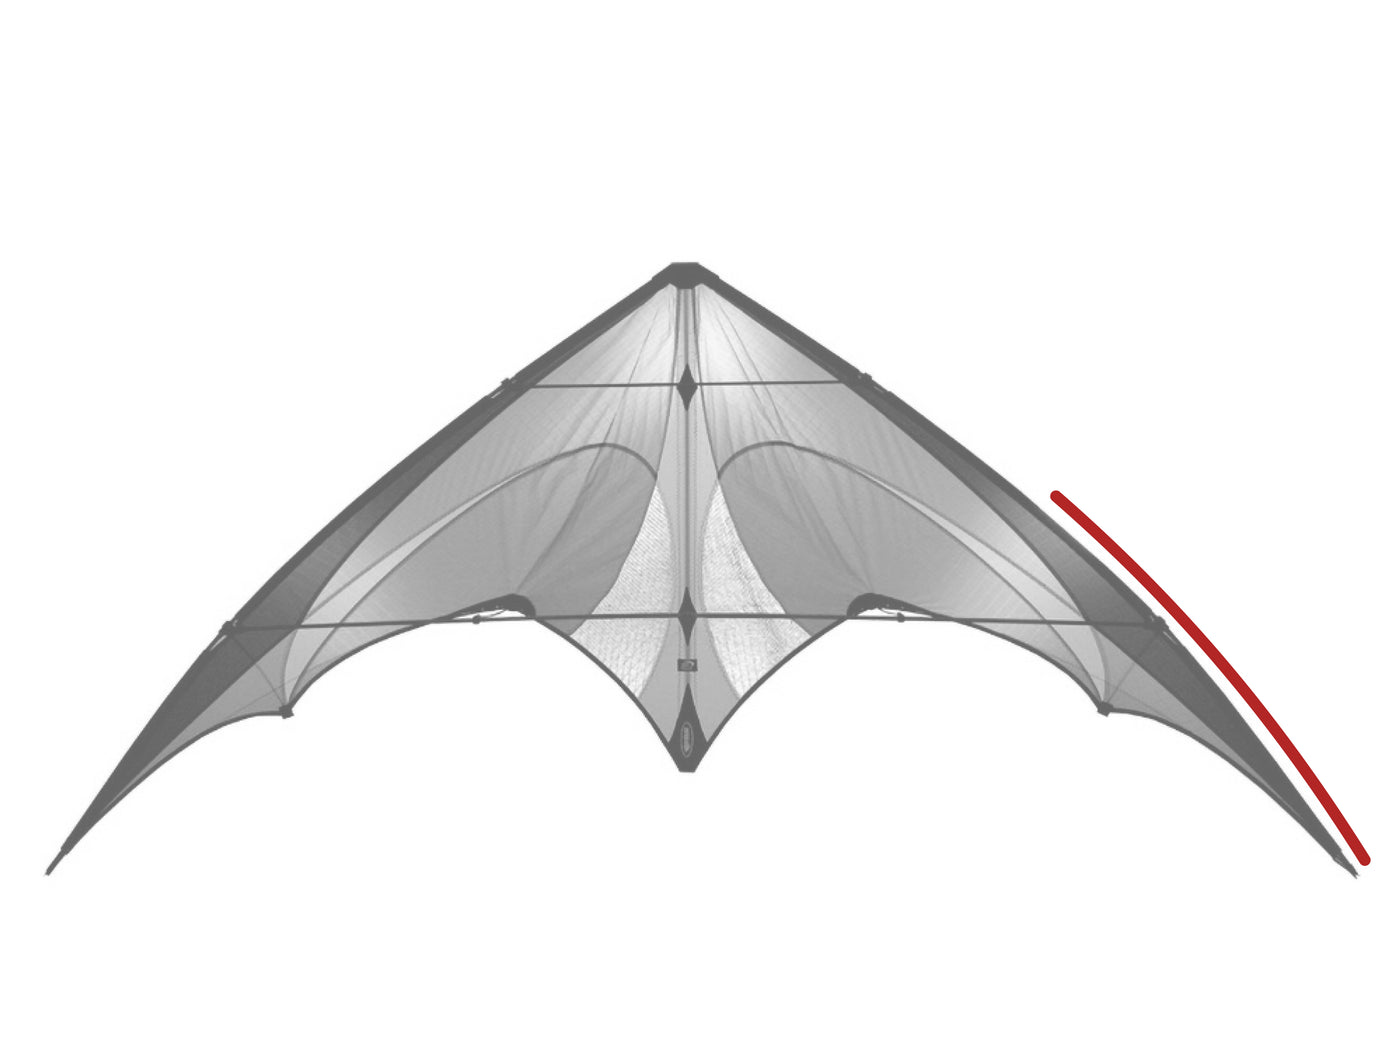 Diagram showing location of the E2 Lower Leading Edge on the kite.